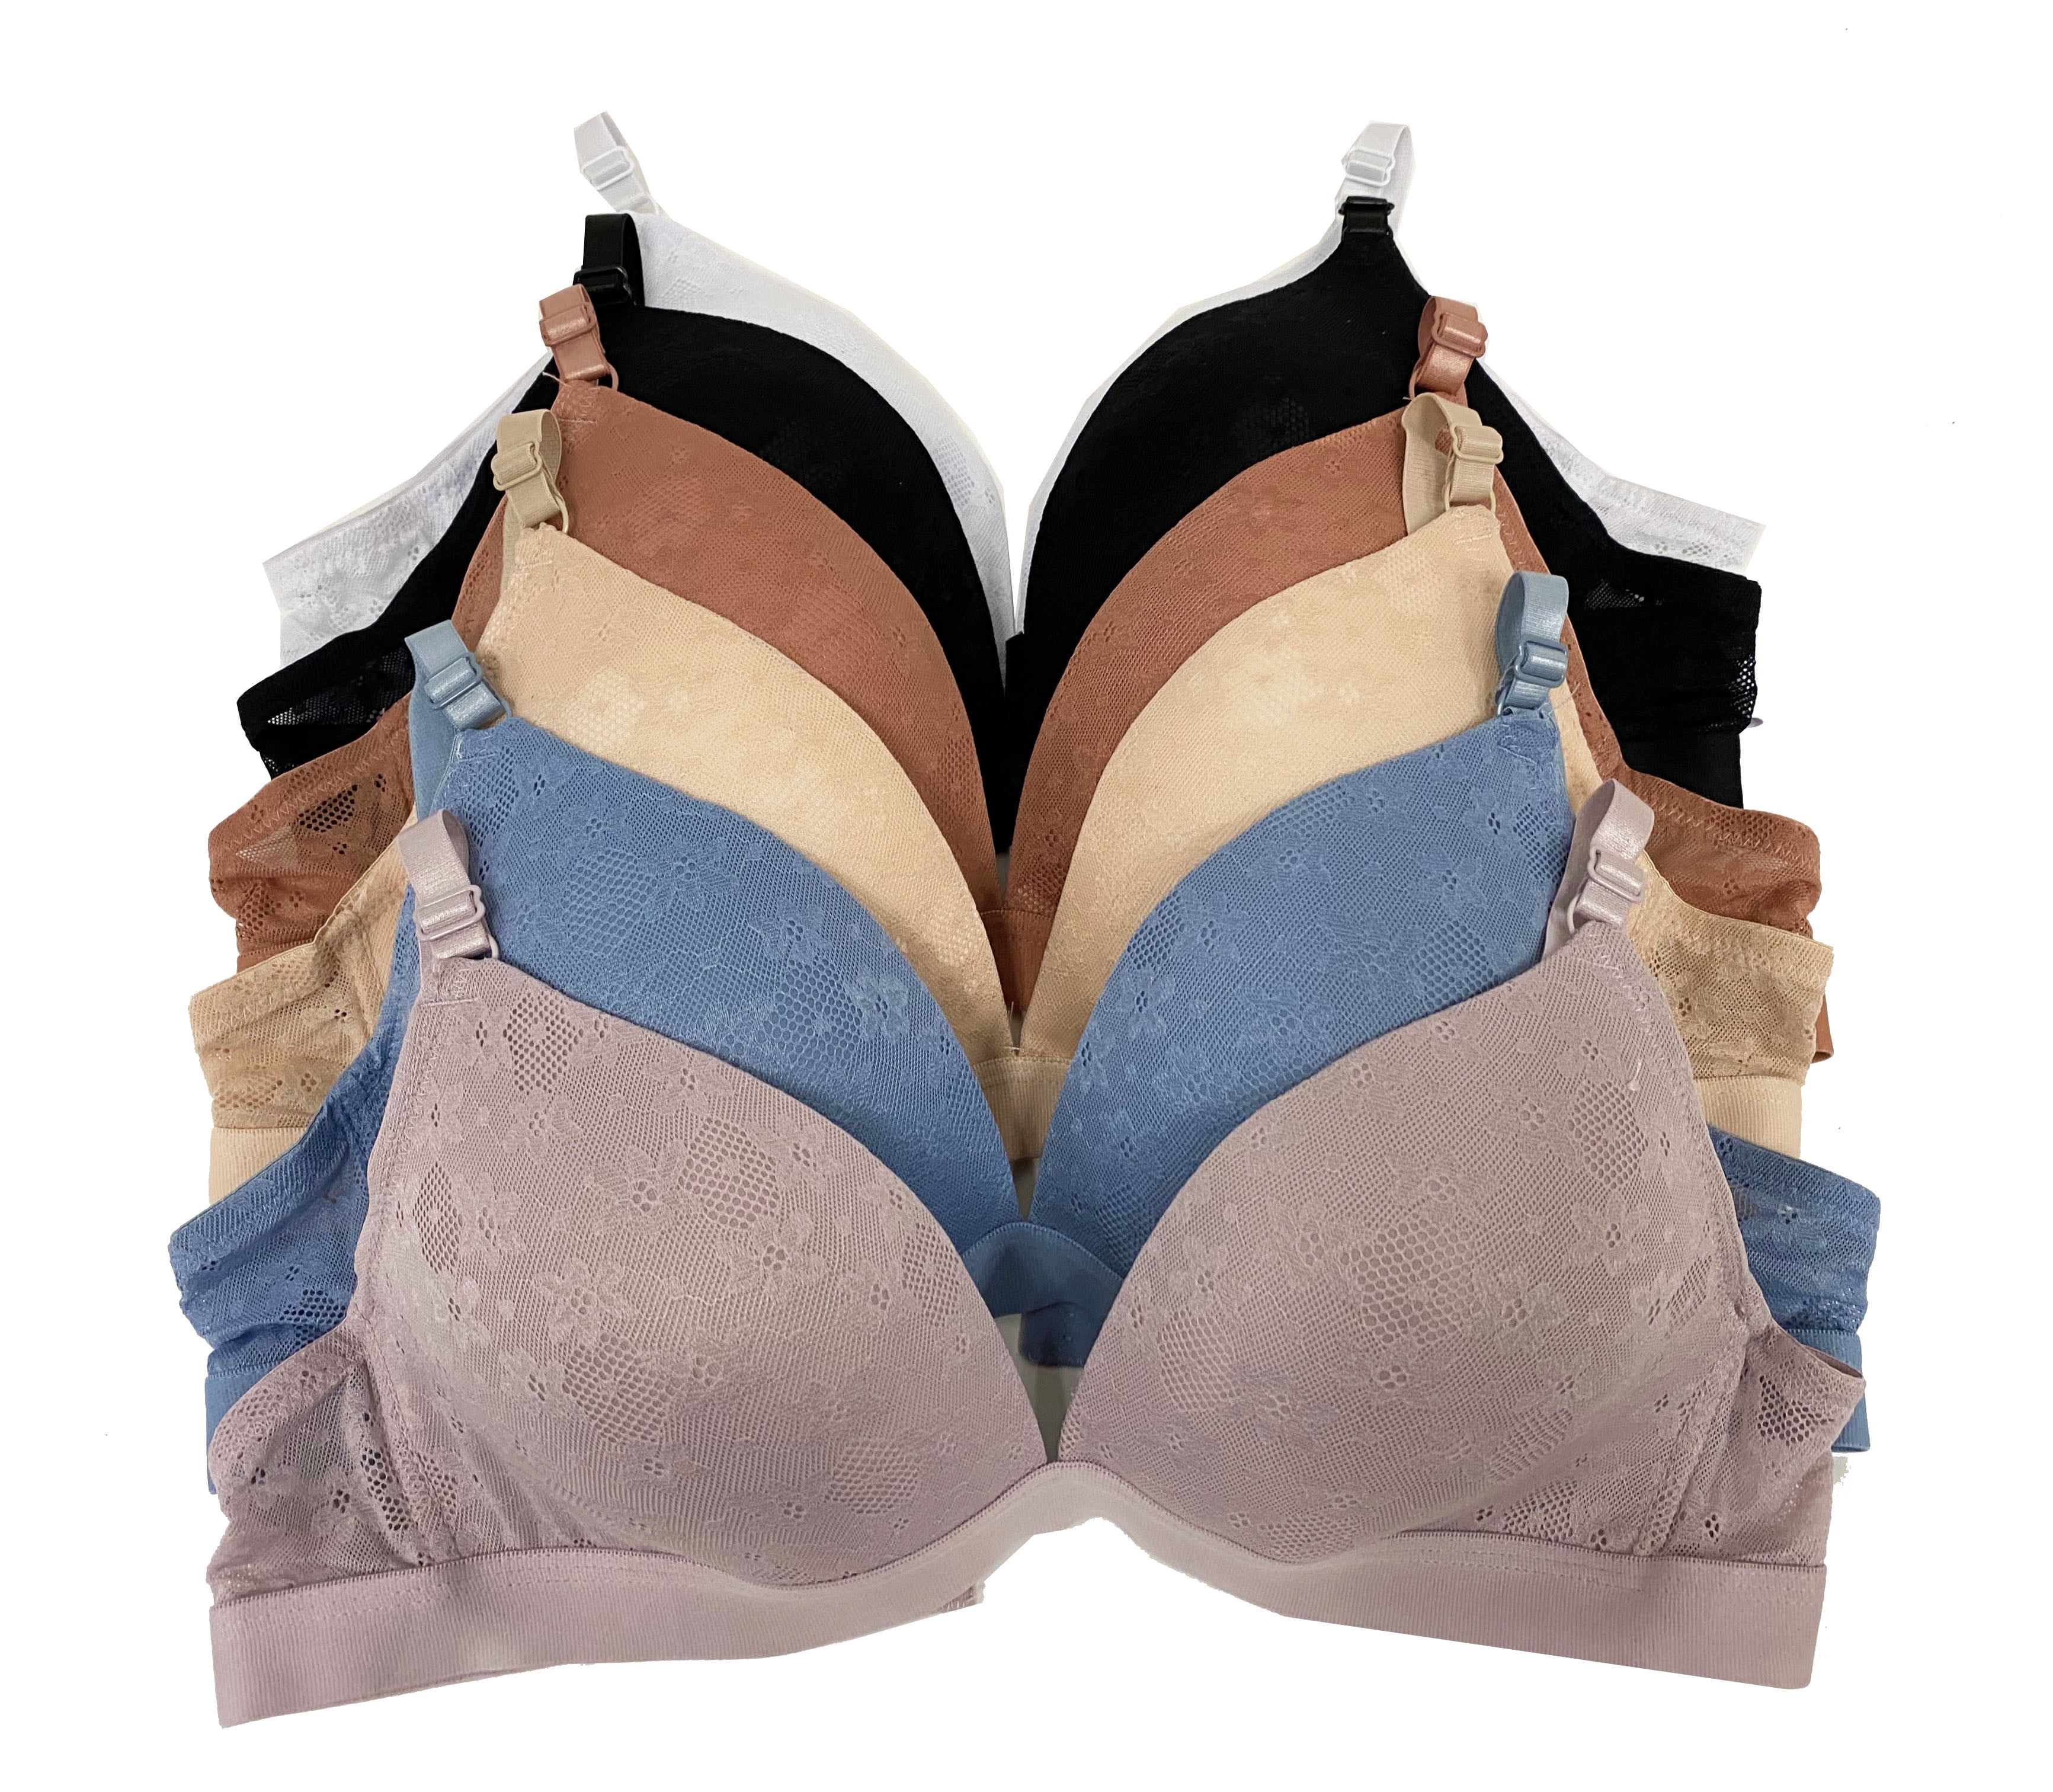 Women Bras 6 pack of Basic No Wire Free Wireless Bra B cup C cup Size 36B  (S6319)